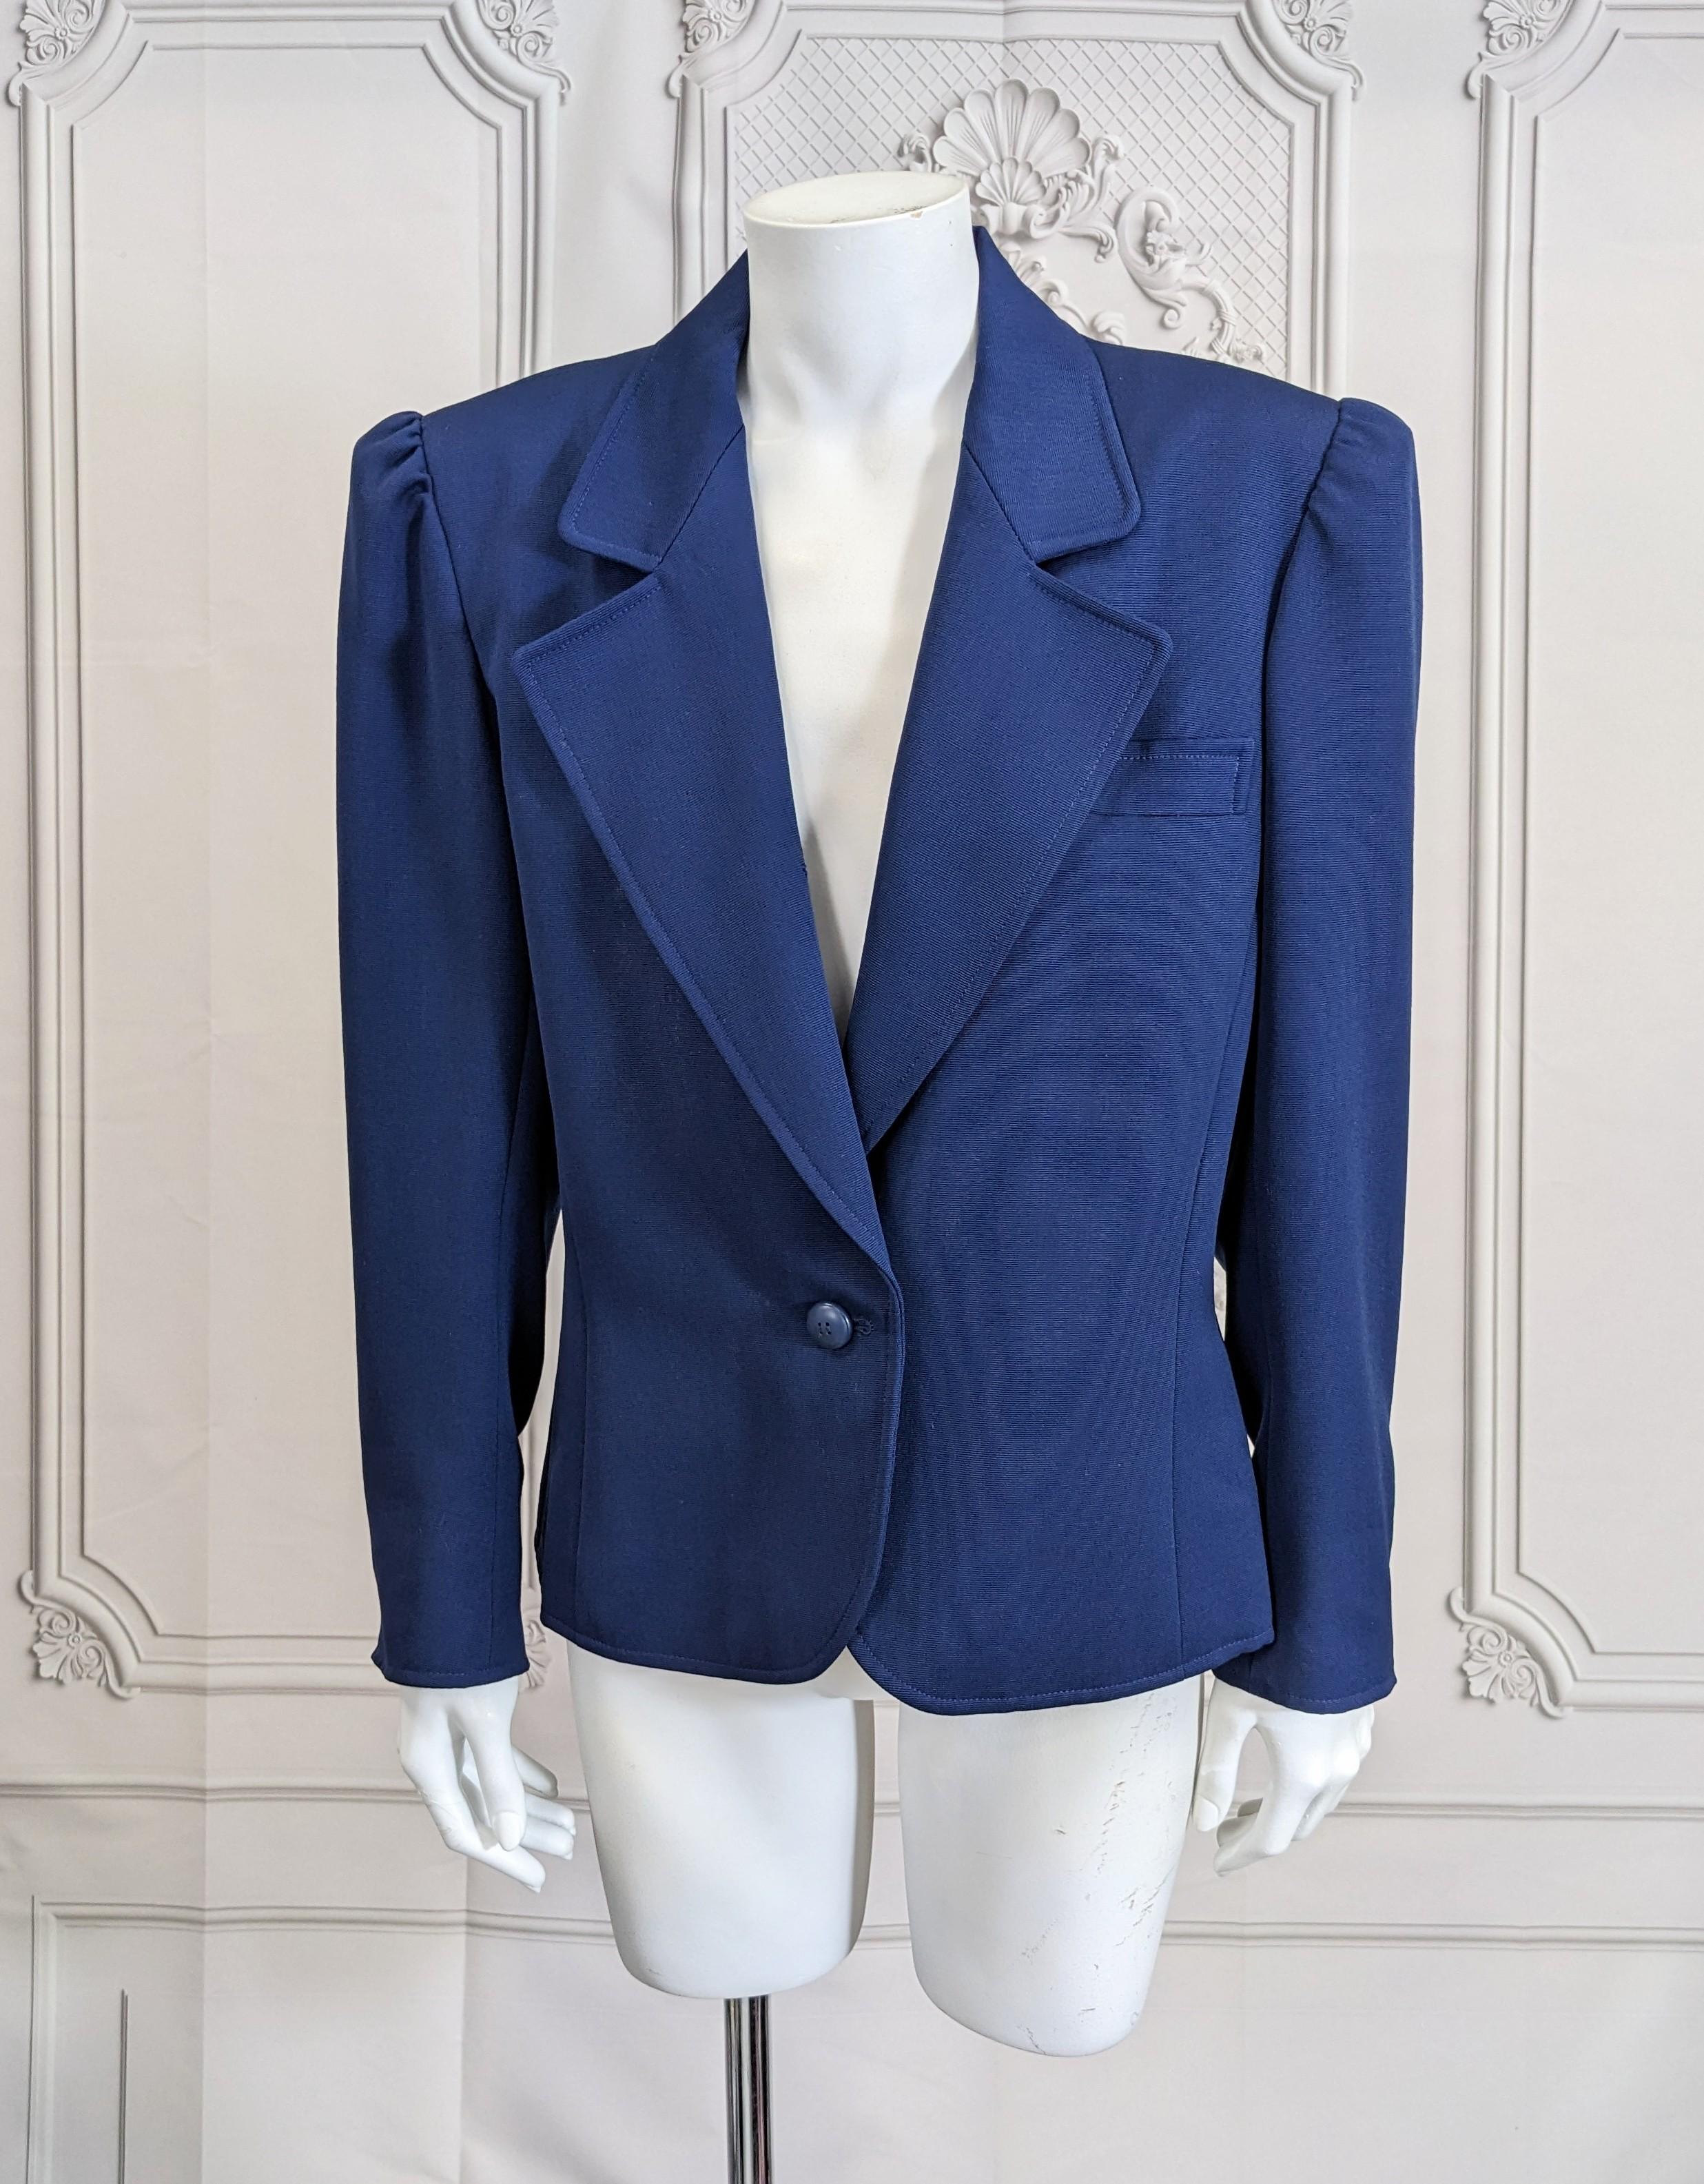 Yves Saint Laurent Puff Sleeve Blazer in deep blue faille. YSL cuts the best blazers around. Strong shoulders with the body of the jacket grazing over the body as opposed to tight. Single button closure. 
A forever wardrobe staple. Size 42 France.